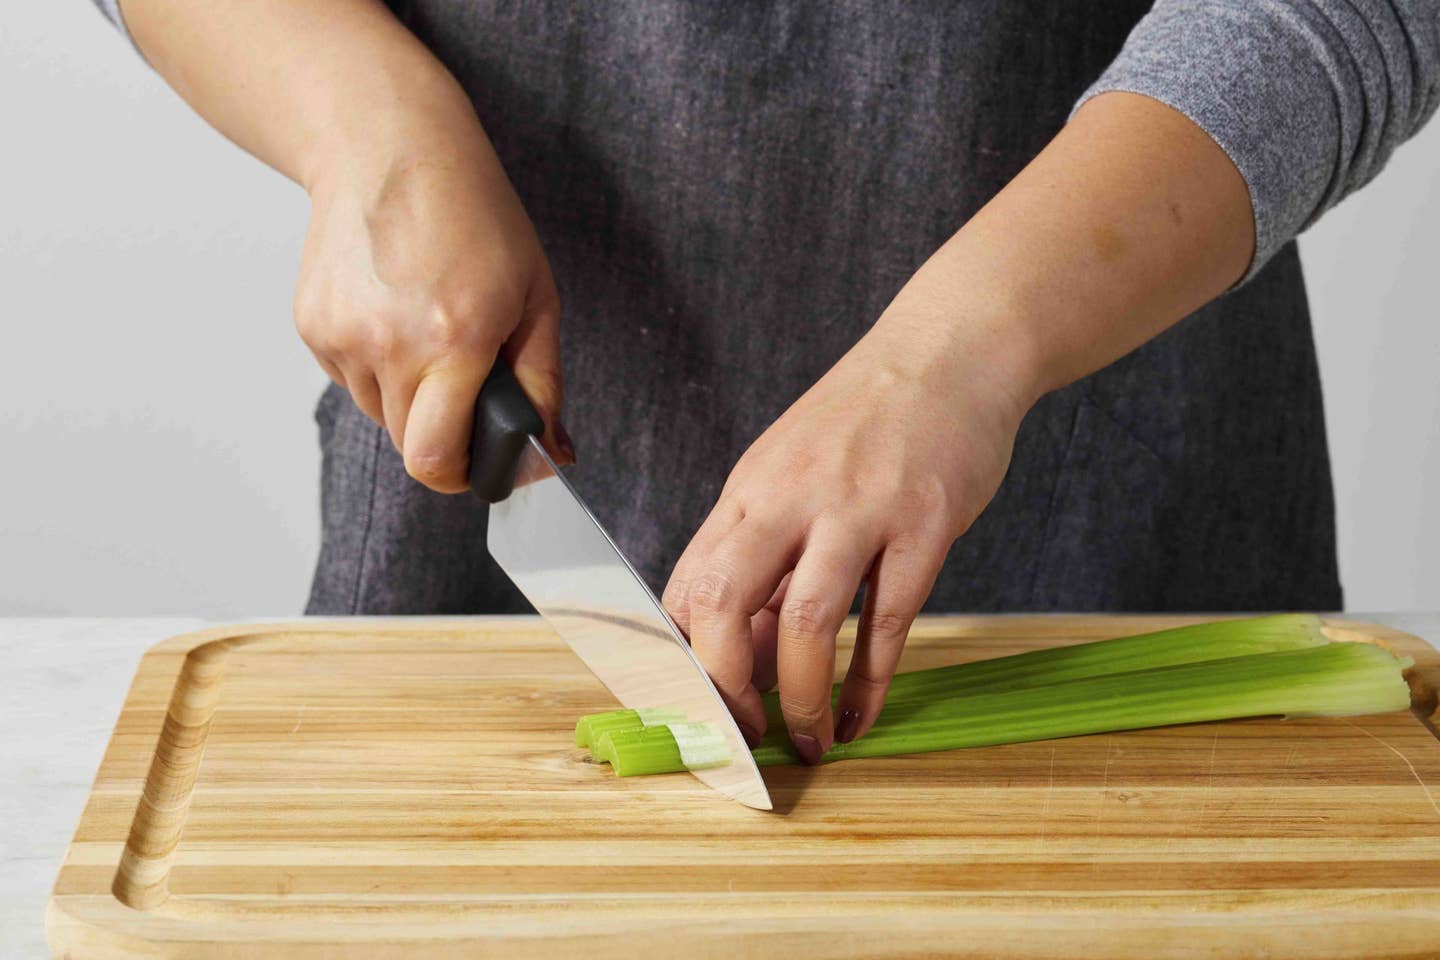 the midsection of a person standing behind a counter with celery on a cutting board, slicing the celery with a knife, demonstrating slicing techniques